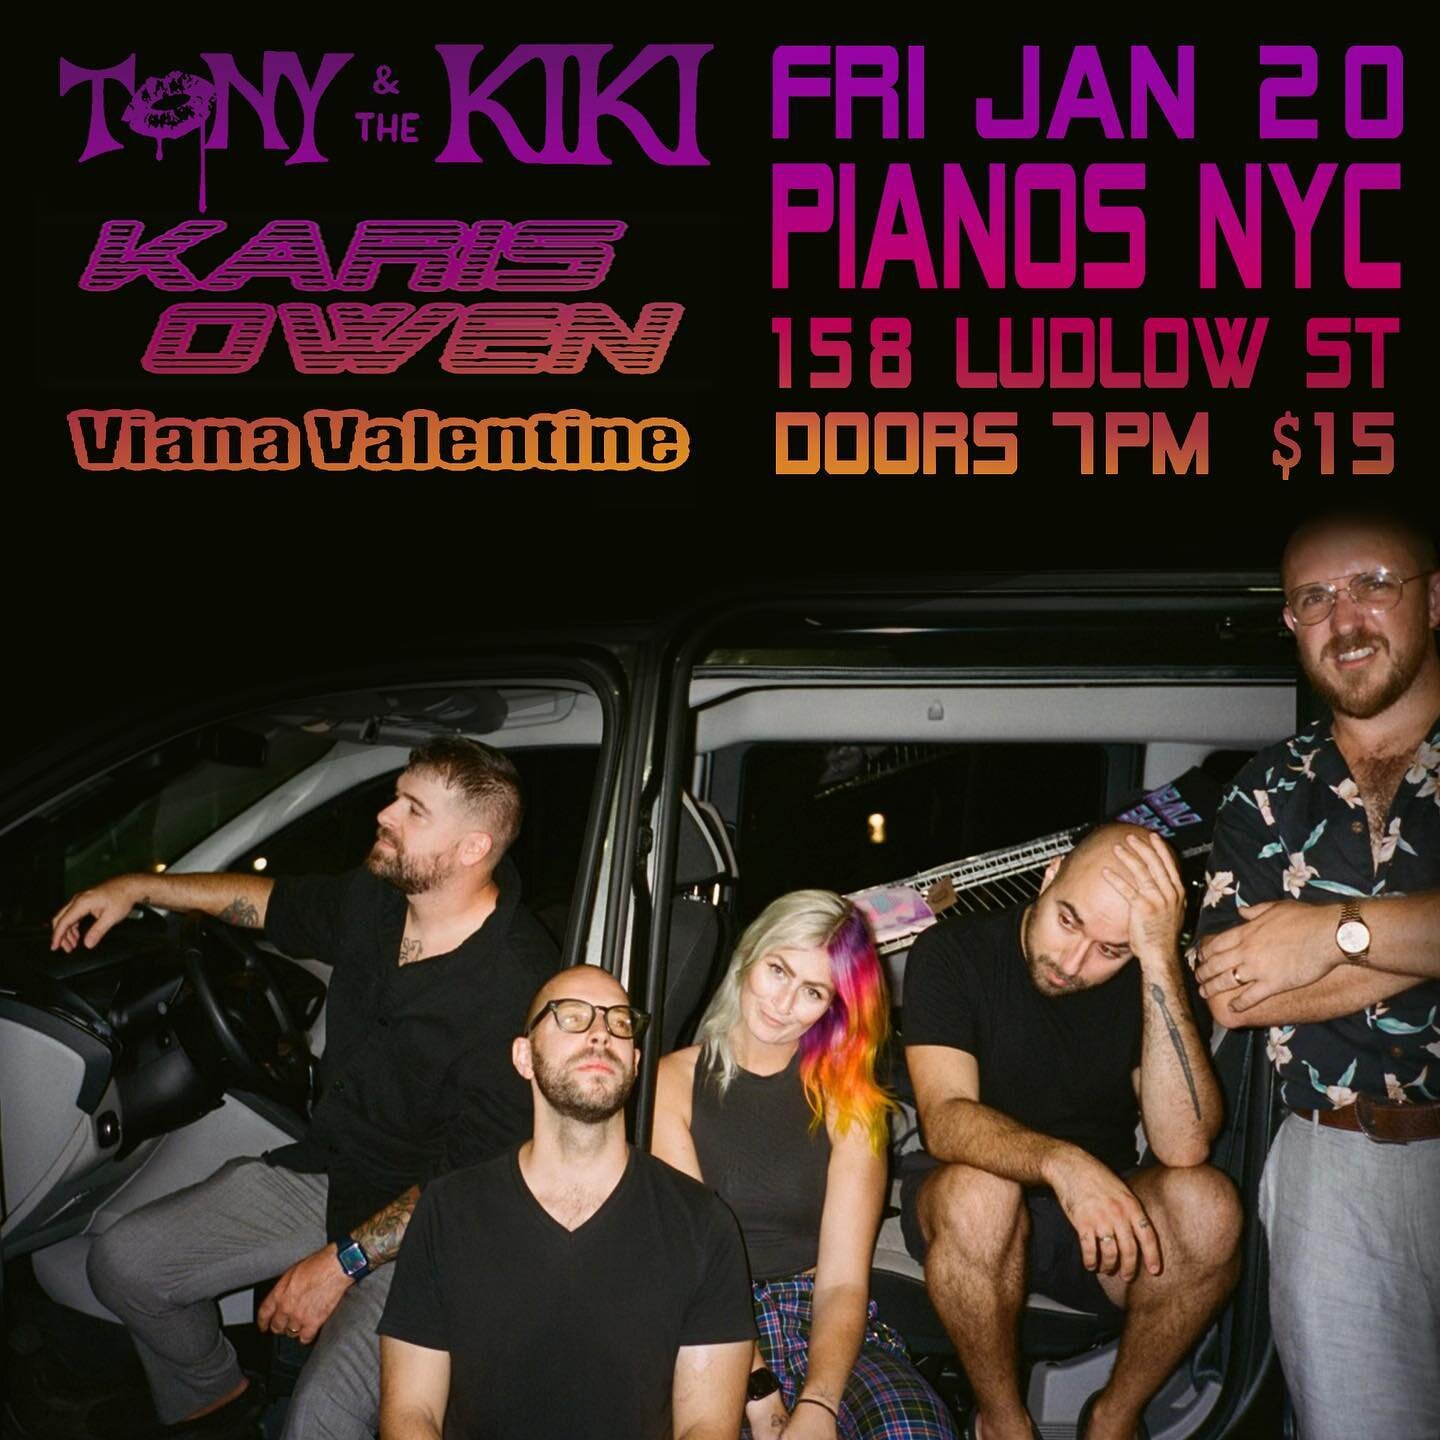 Our show at @pianosnyc is just over two weeks away! Lemme tell ya, LES is gonna be poppin&rsquo;! With our new friends @tonyandthekiki headlinin&rsquo; and our old pal @vianavalentine opening up the evening, it&rsquo;s gonna be a funky, dancey, dirty